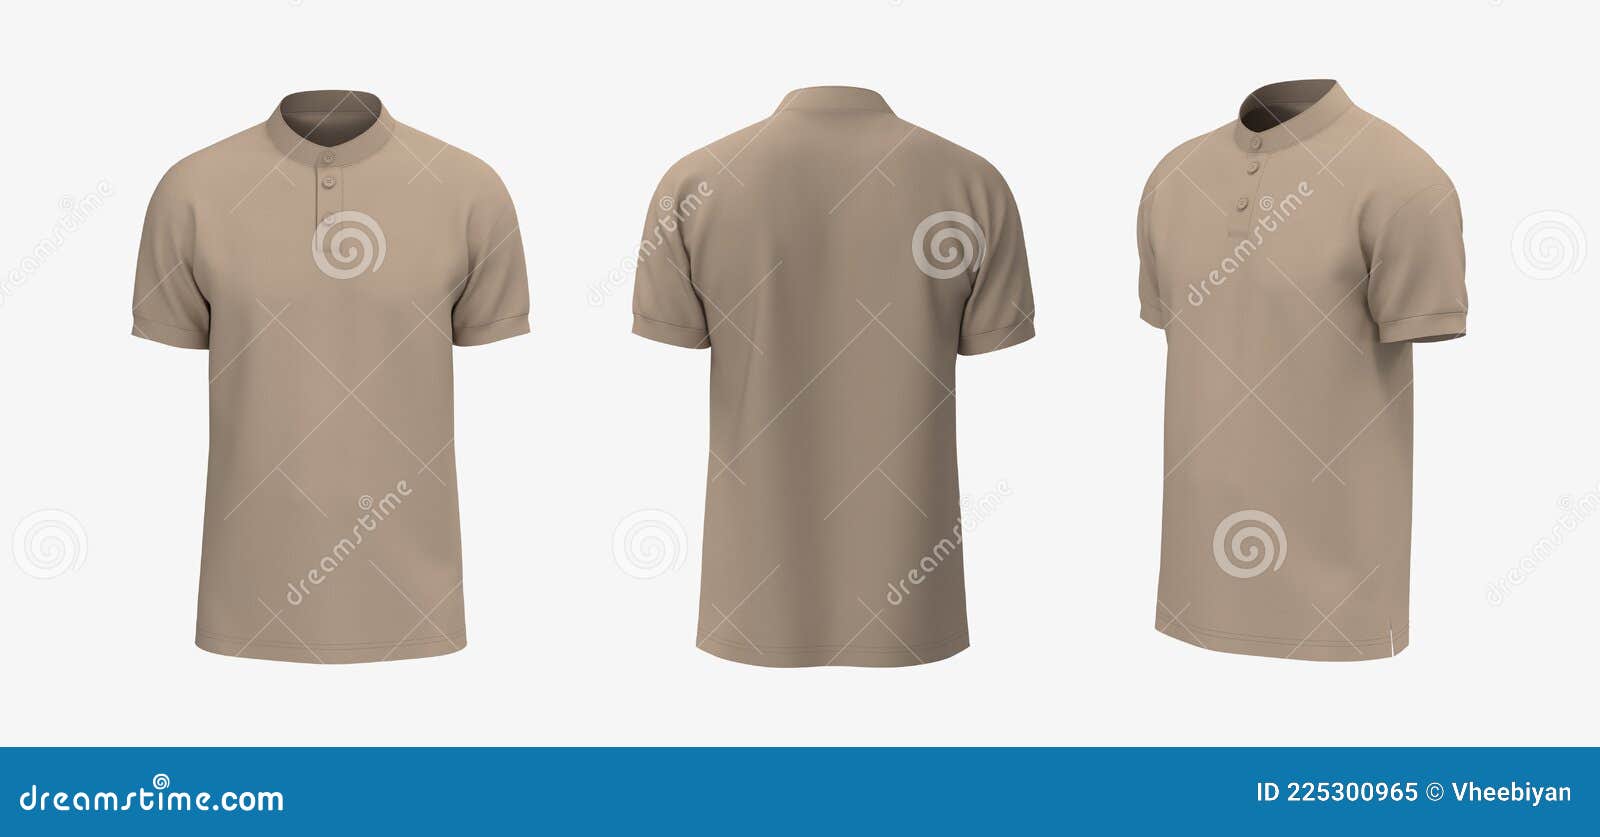 blank mandarin collar t-shirt mockup in front, side and back views